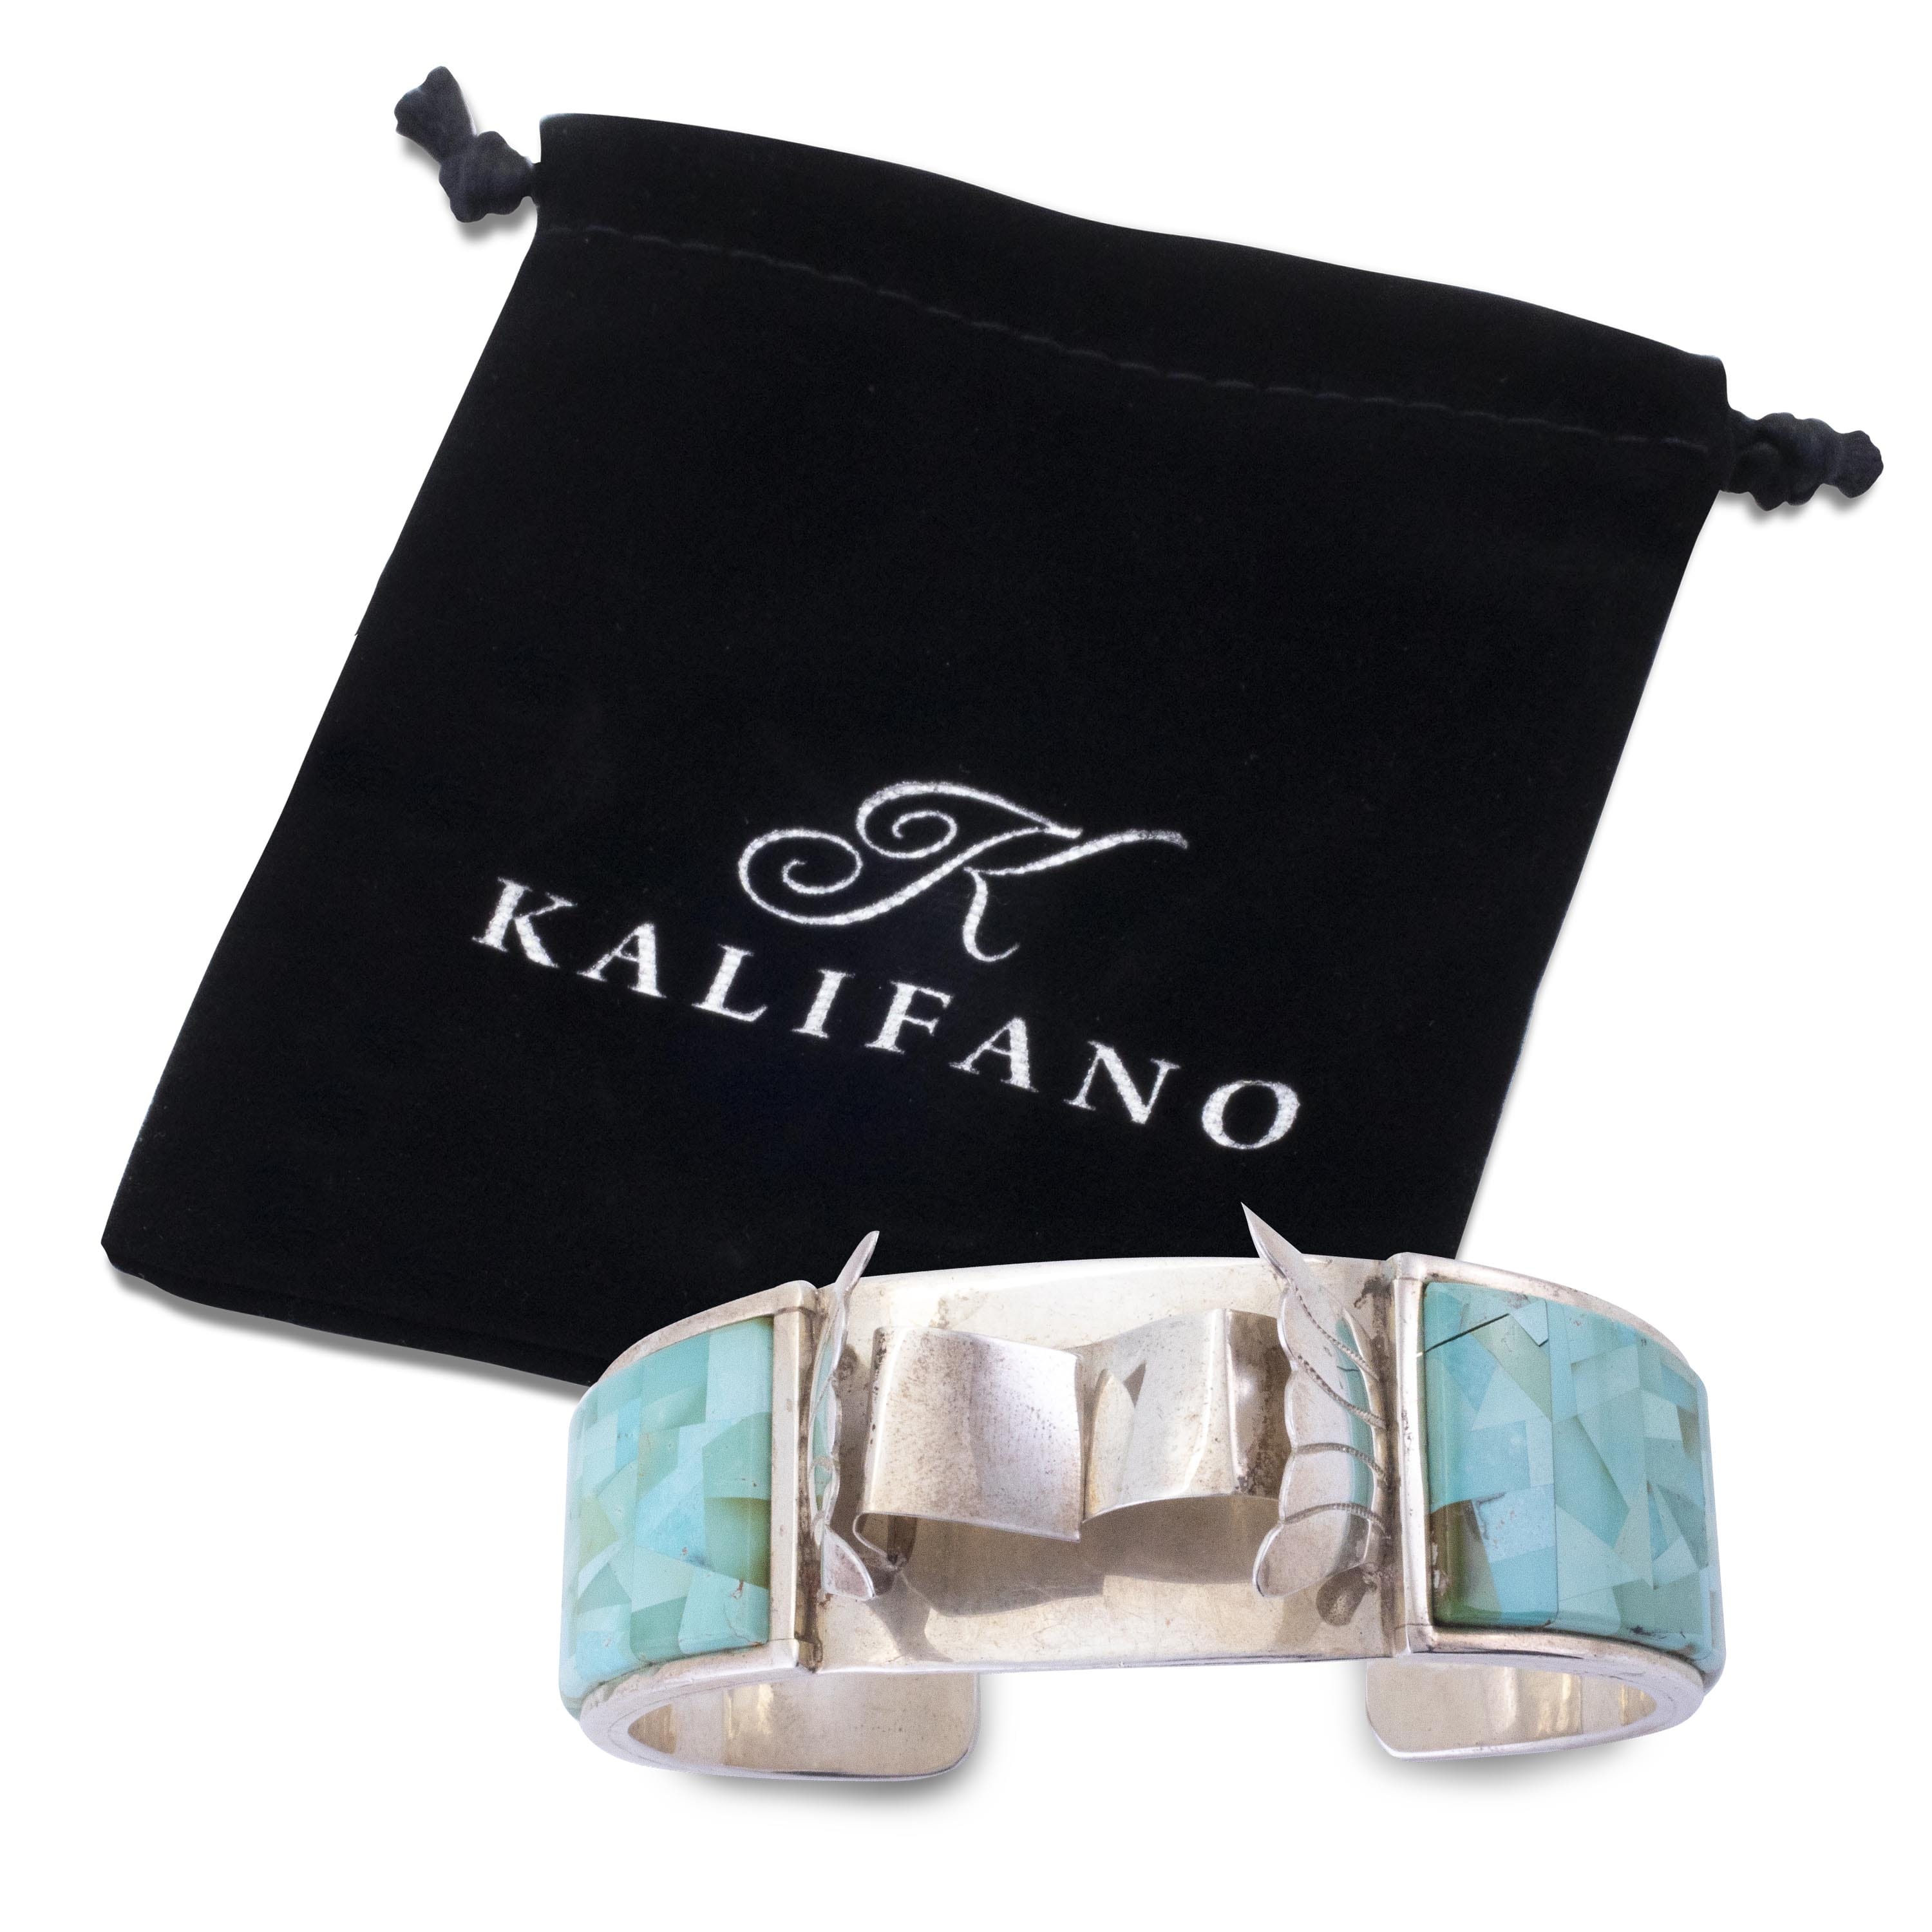 Kalifano Native American Jewelry Royston Turquoise Inlay by Calvin Desson with Silverwork by Ronald Tom USA Native American Made 925 Sterling Silver Cuff NAB4800.001